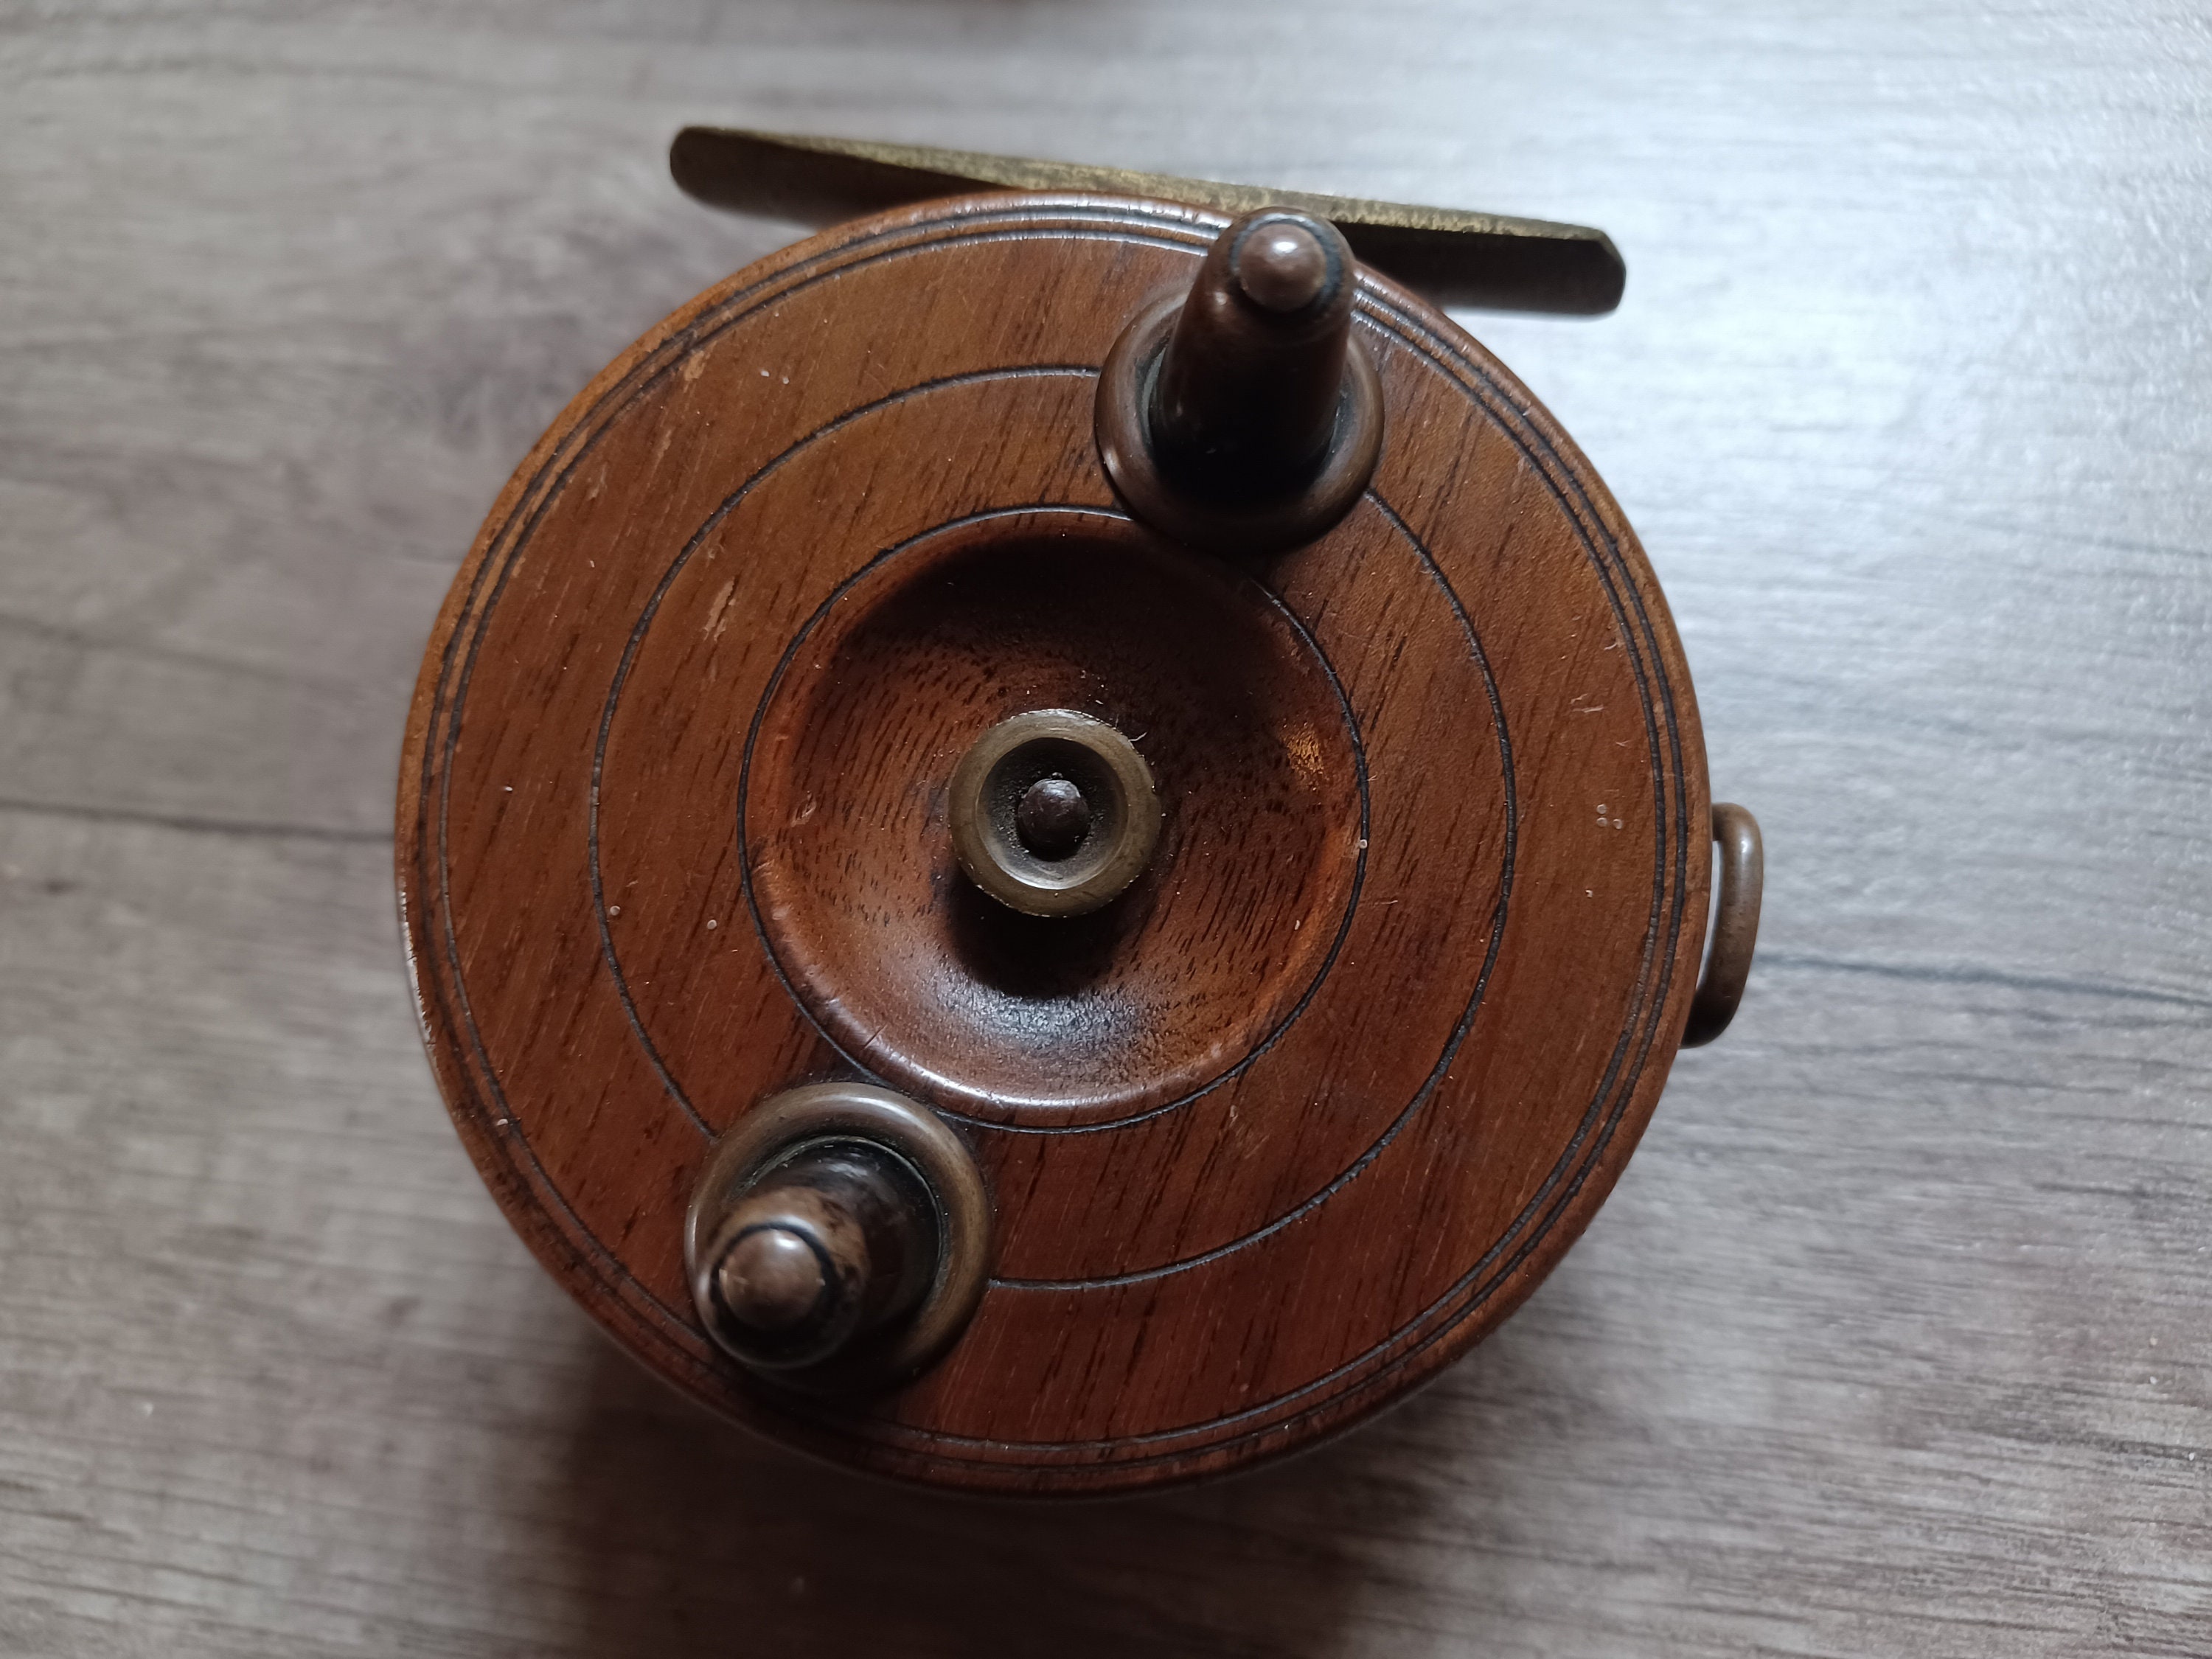 A Small Vintage Wood and Brass Starback Centrepin Reel, Nottingham Style,  Complete With a Brass Line Guide